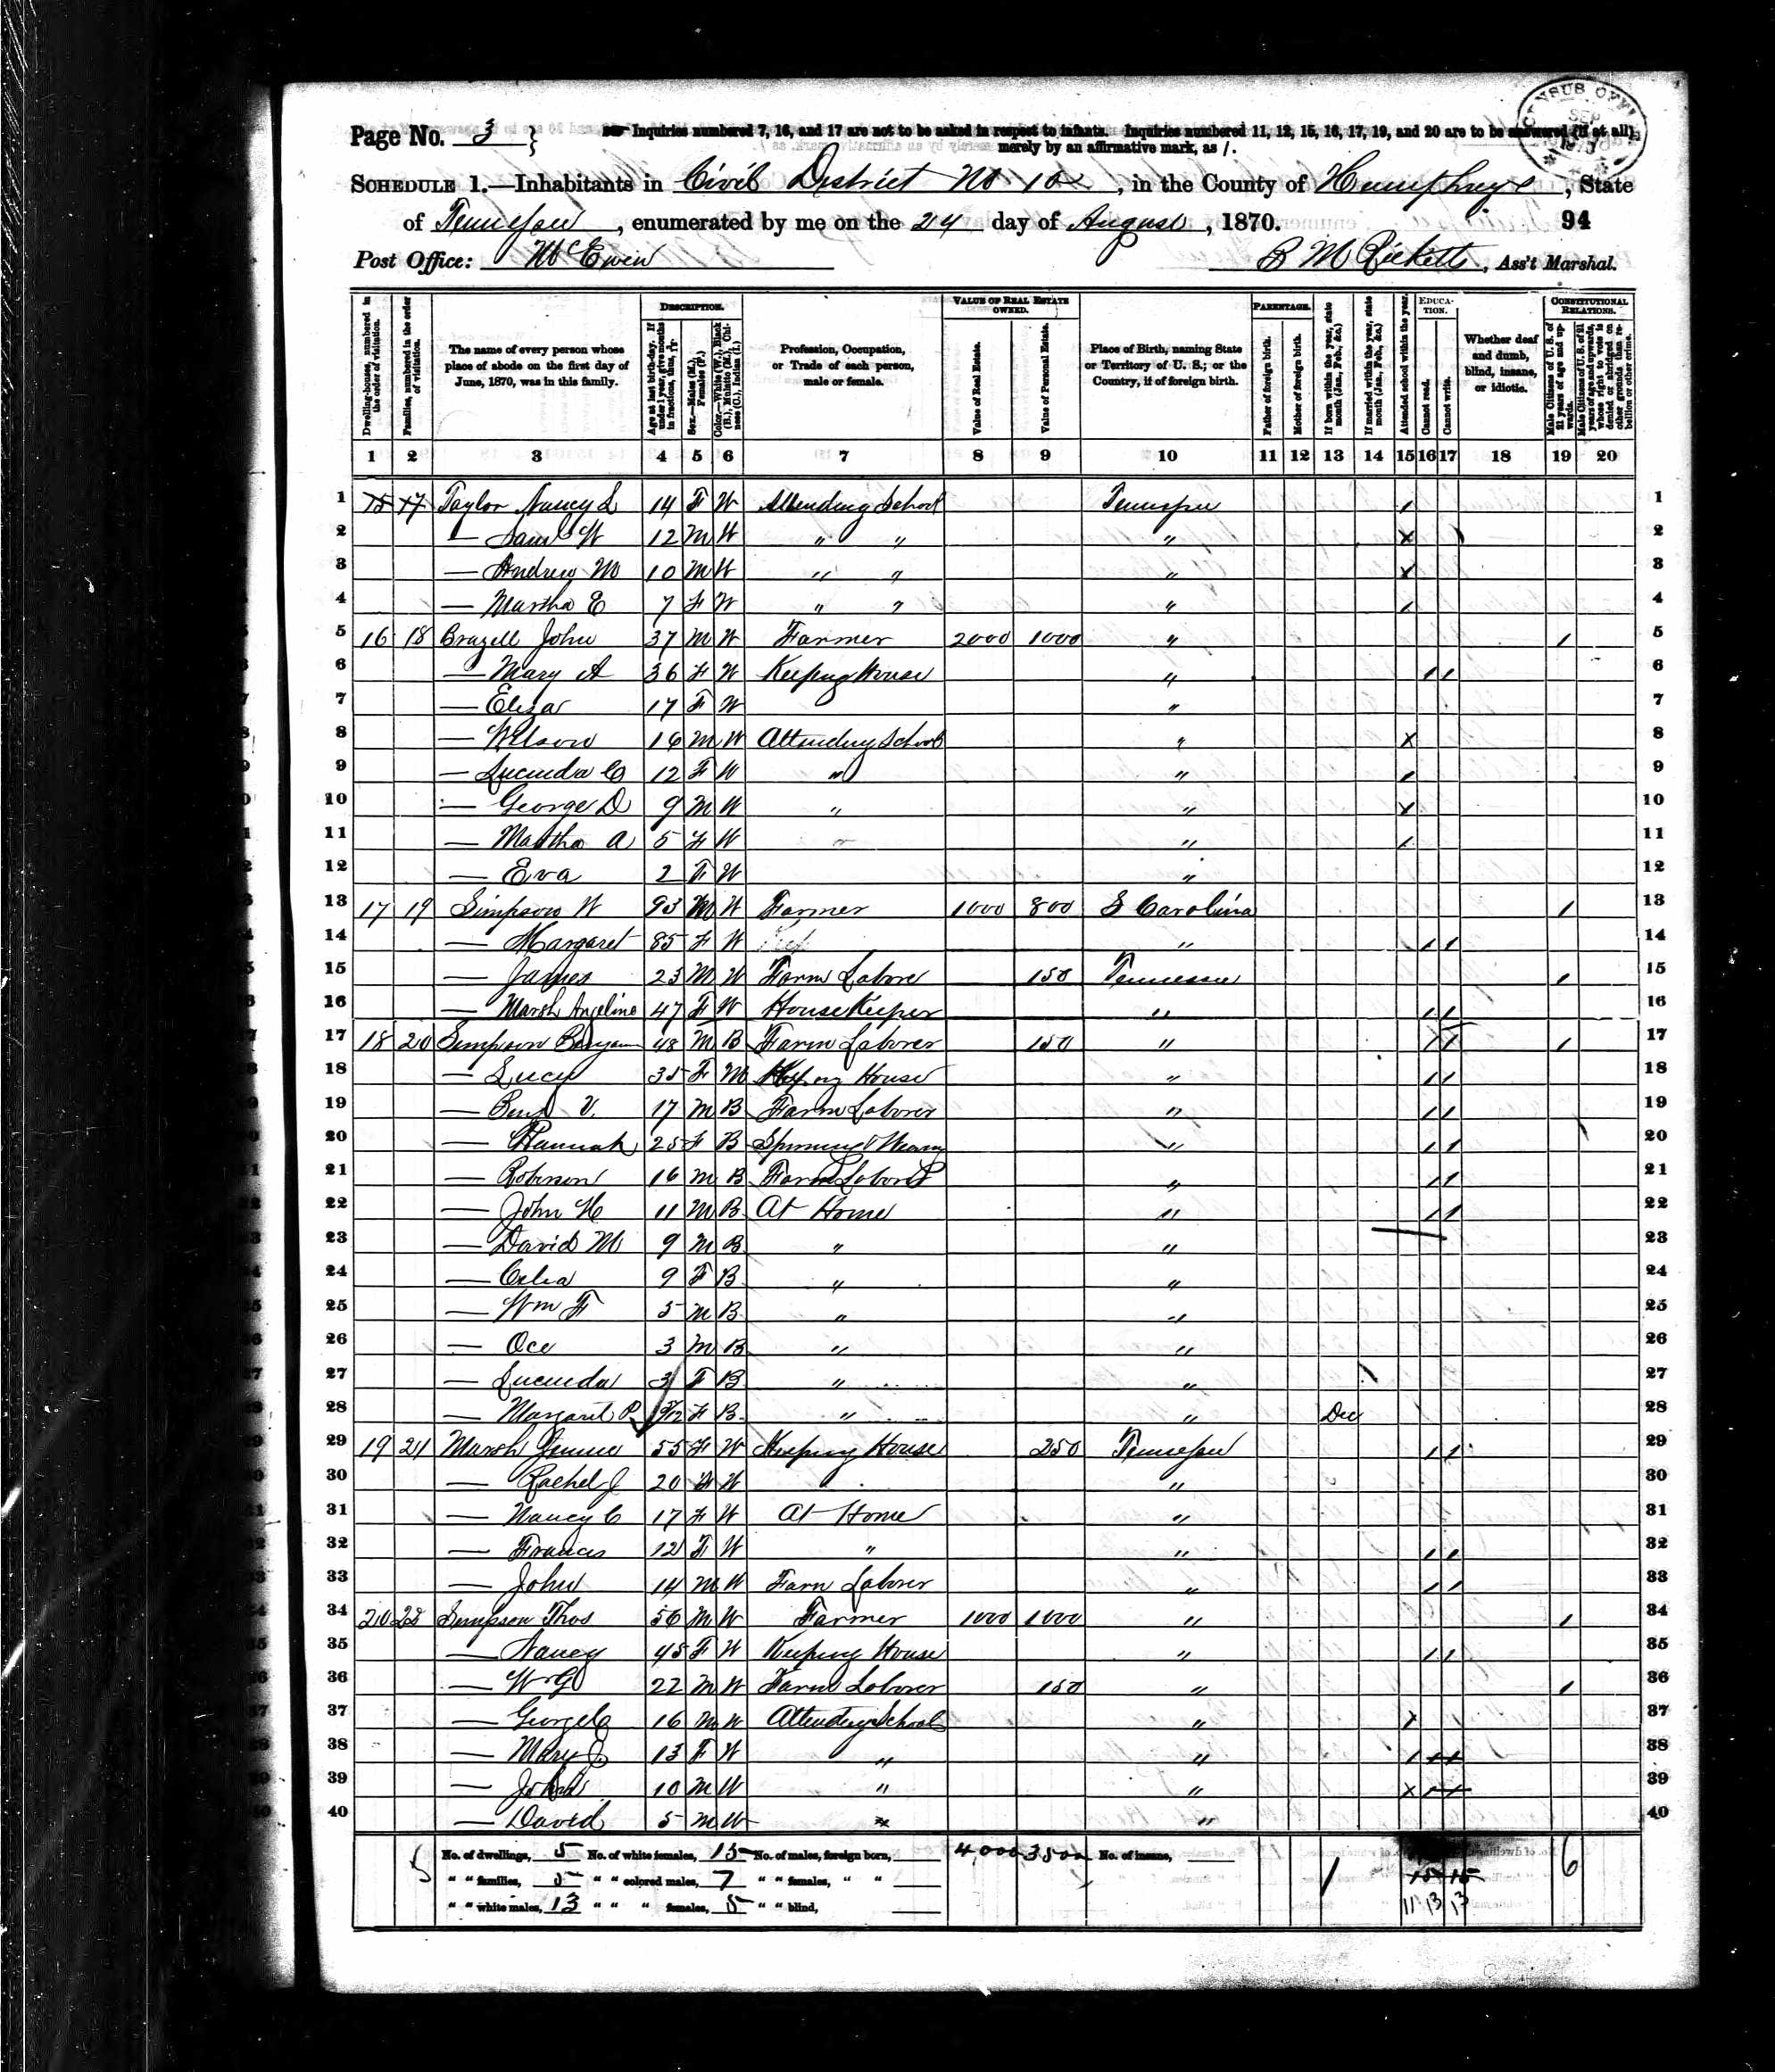 John Brazzell, 1870 Humphreys County, Tennessee, census